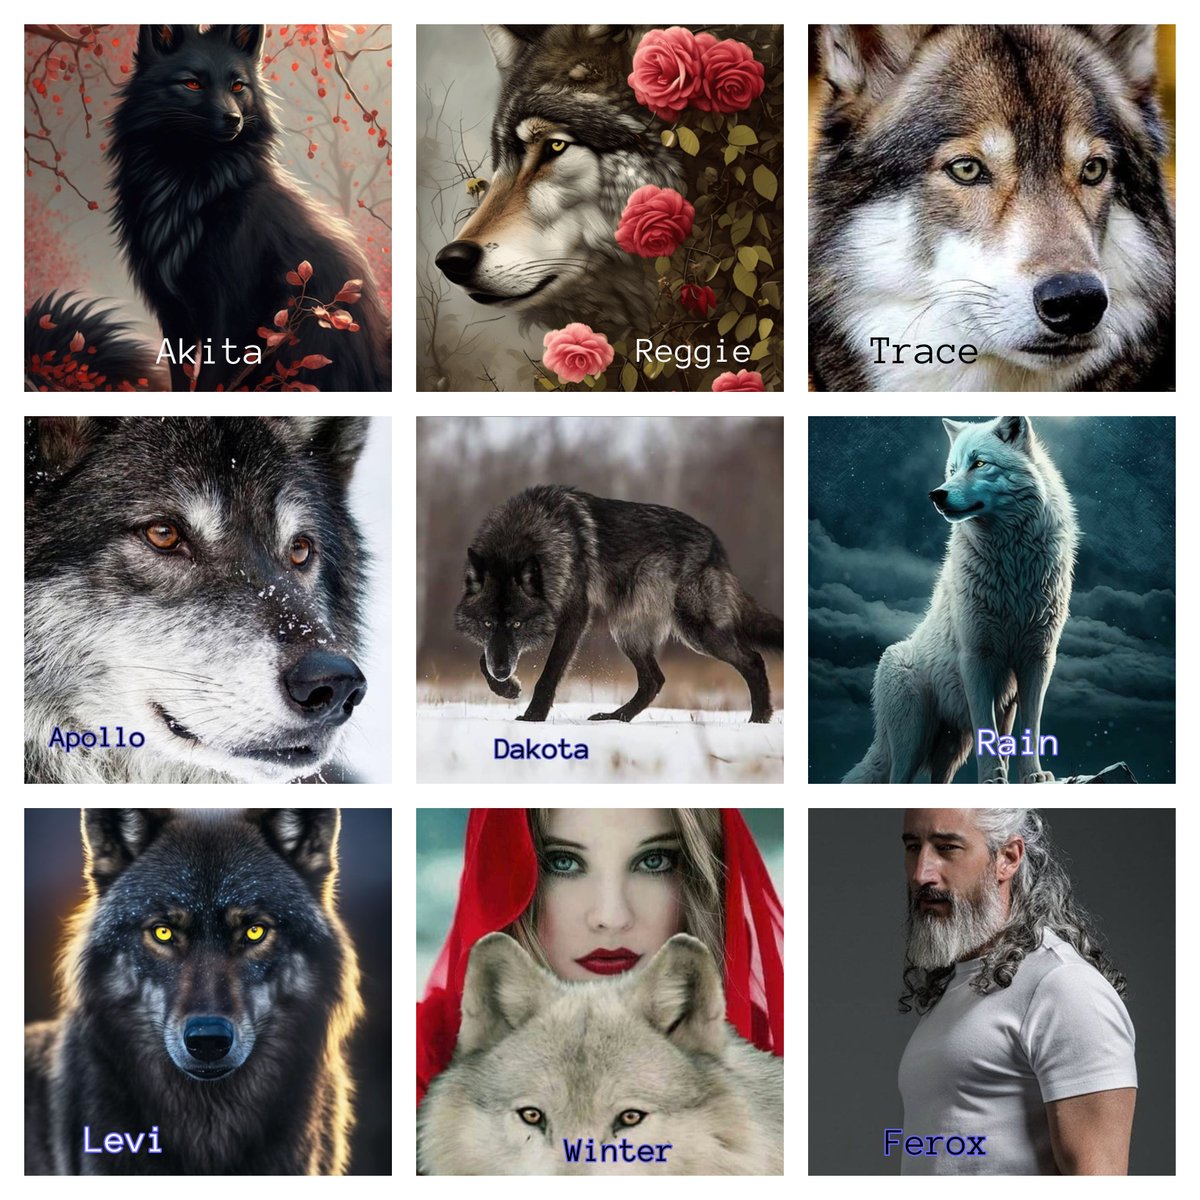 WHICH CHARACTER ARE YOU LIKE?
Rain of the Wolves
Destiny of the Wind Walkers.❤️💙💚
Choose a word that describes you.
🌼🌺🌼🌺🌼🌺🌼
Kindness - Akita
Fun -Reggie
Leadership - Trace
Teamwork - Apollo
Loyalty - Dakota
Realist - Rain
Lover - Levi
Thinker - Winter
Proactive - Ferox…